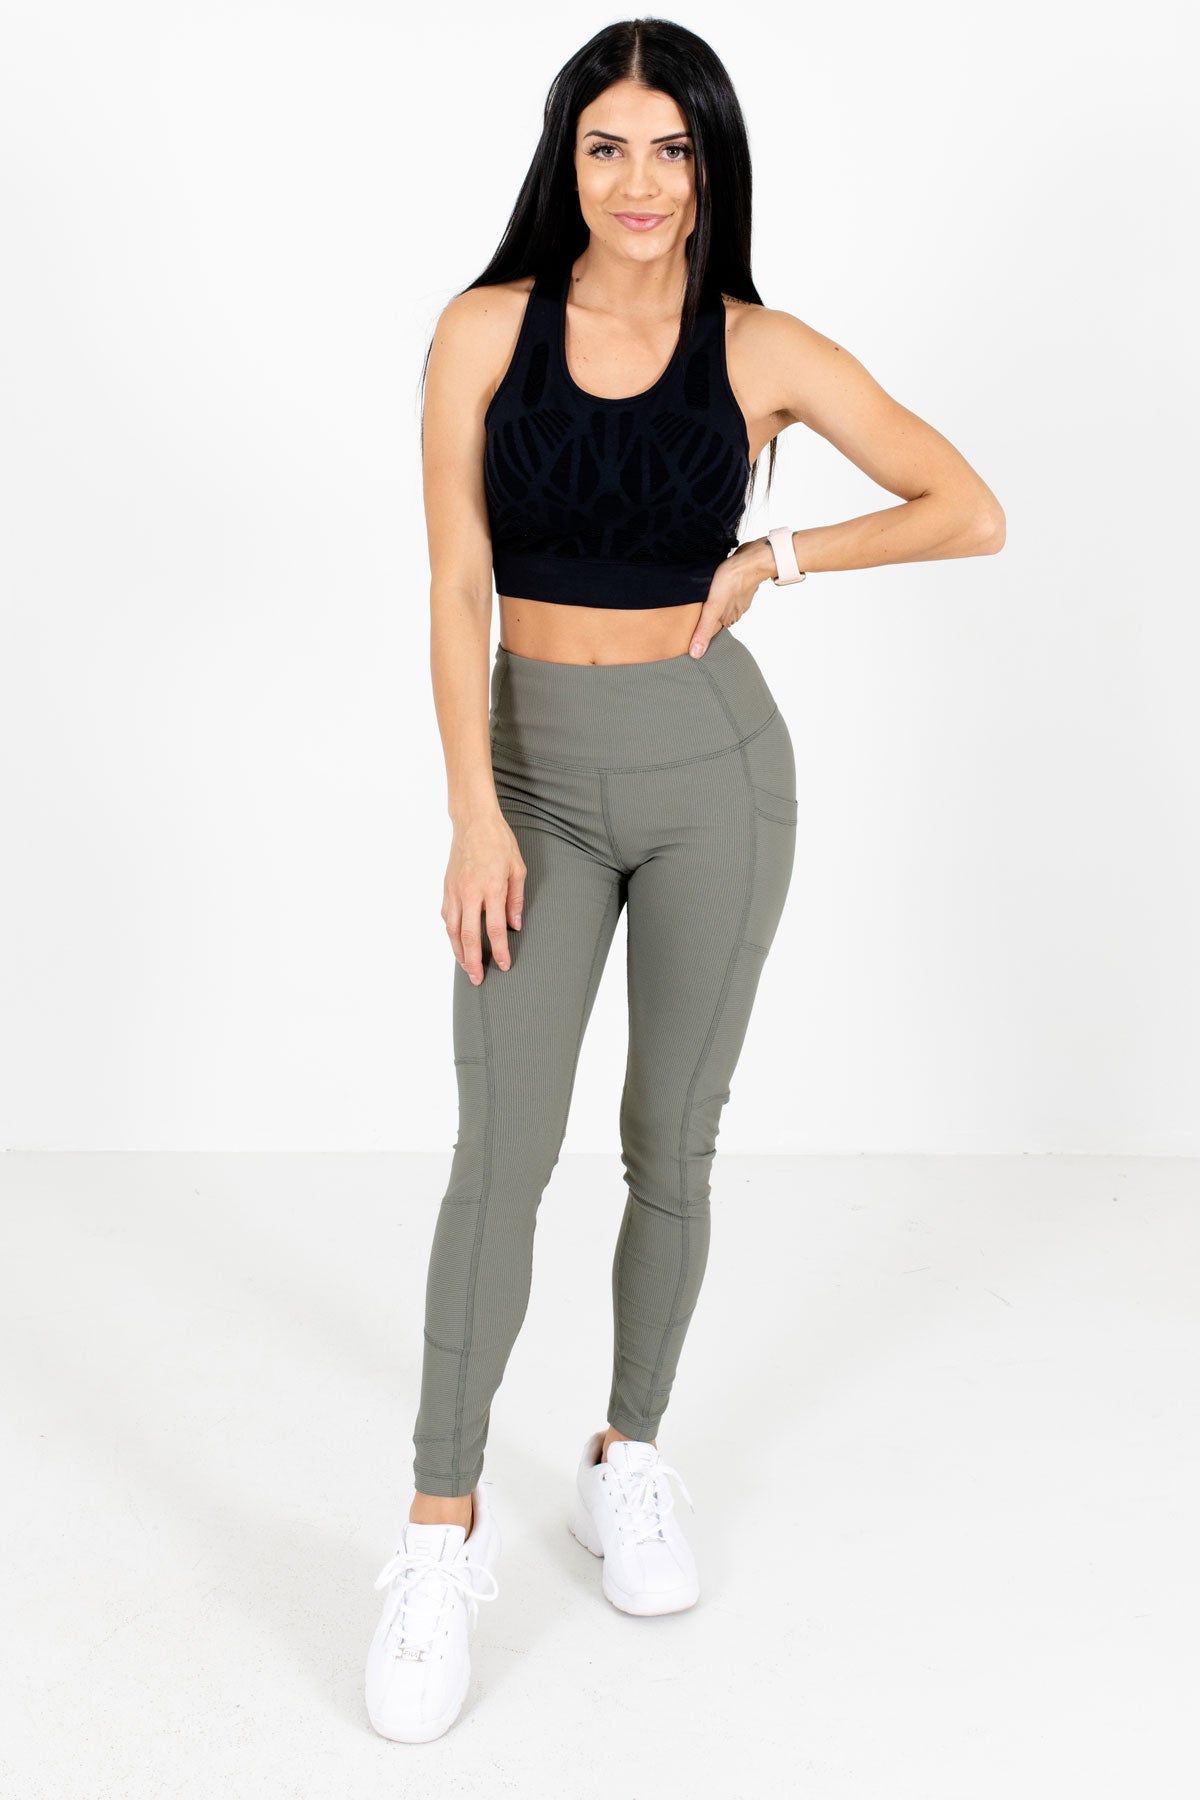 Olive Green Casual Everyday Boutique Leggings for Women